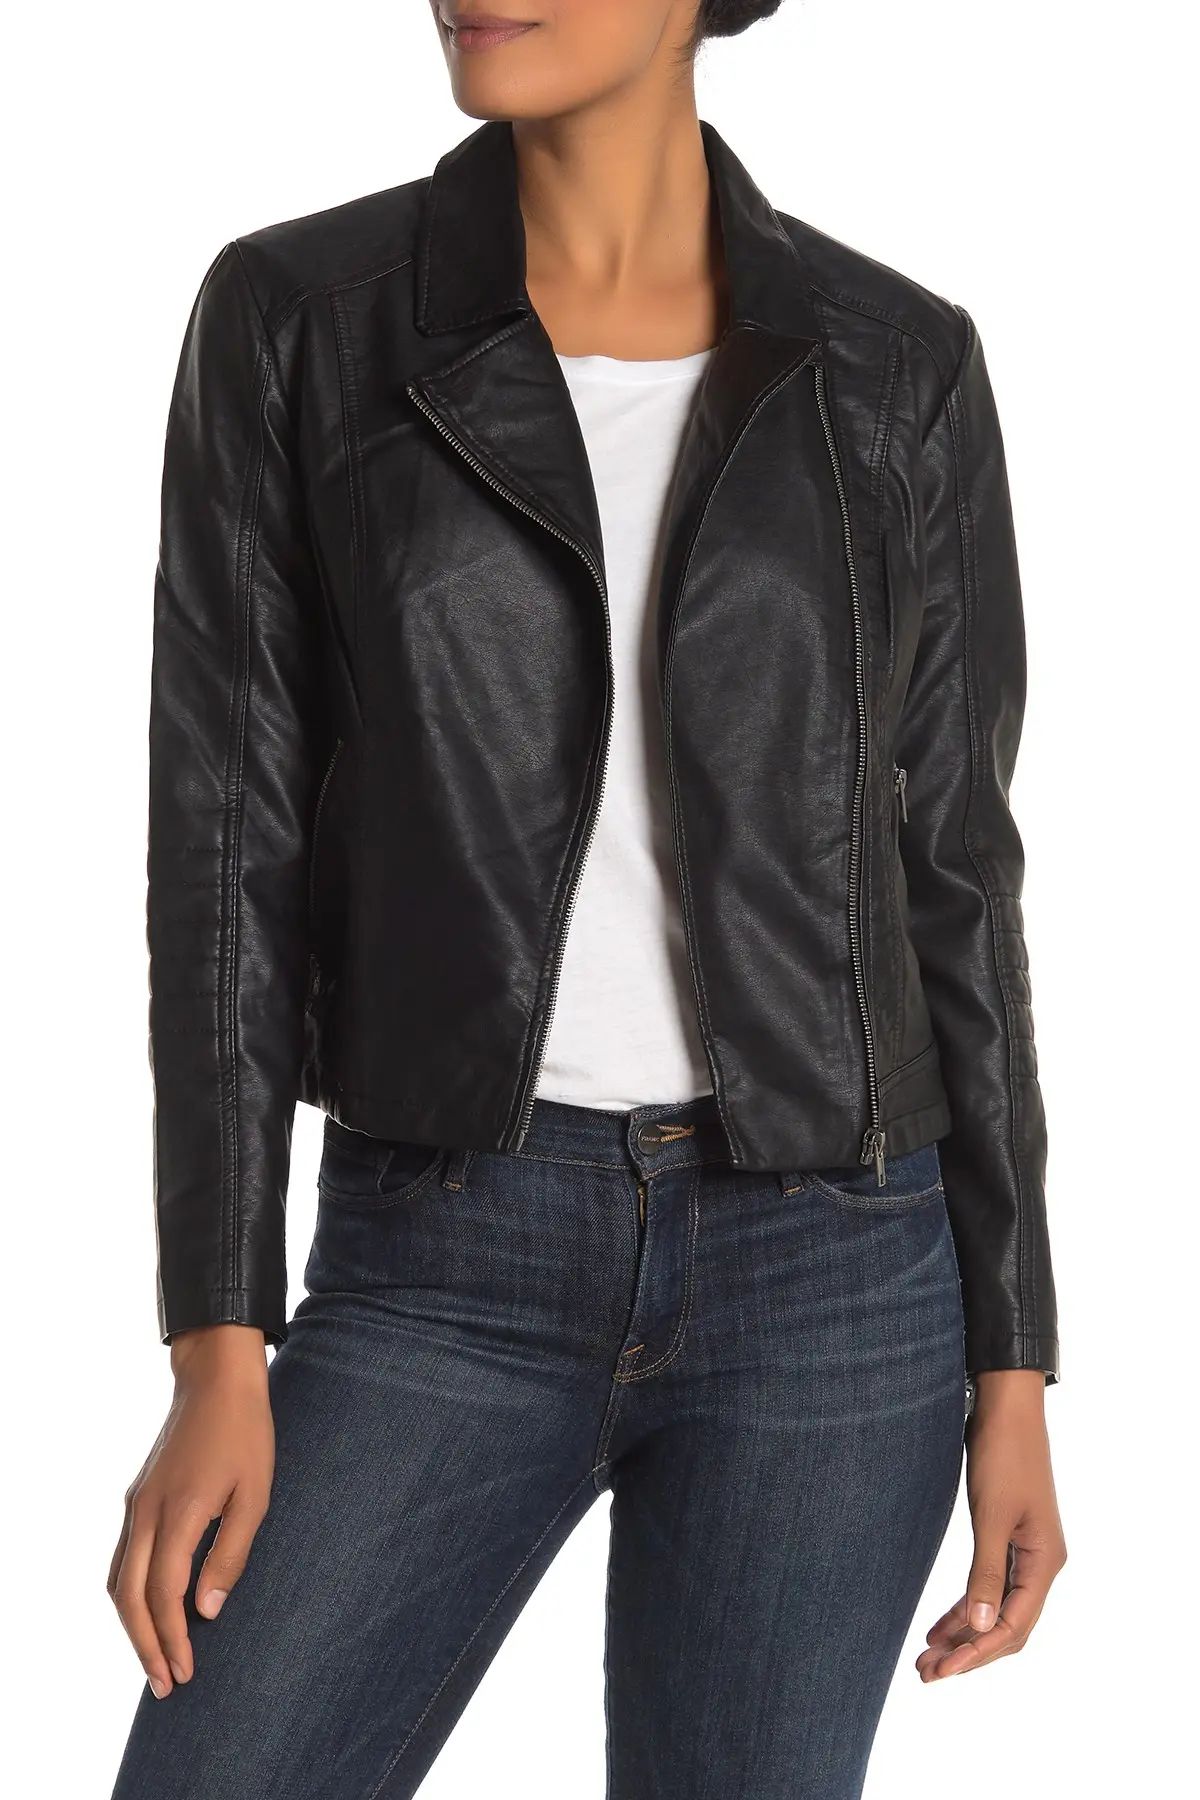 cupcakes and cashmere Faux Leather Moto Jacket at Nordstrom Rack | Hautelook